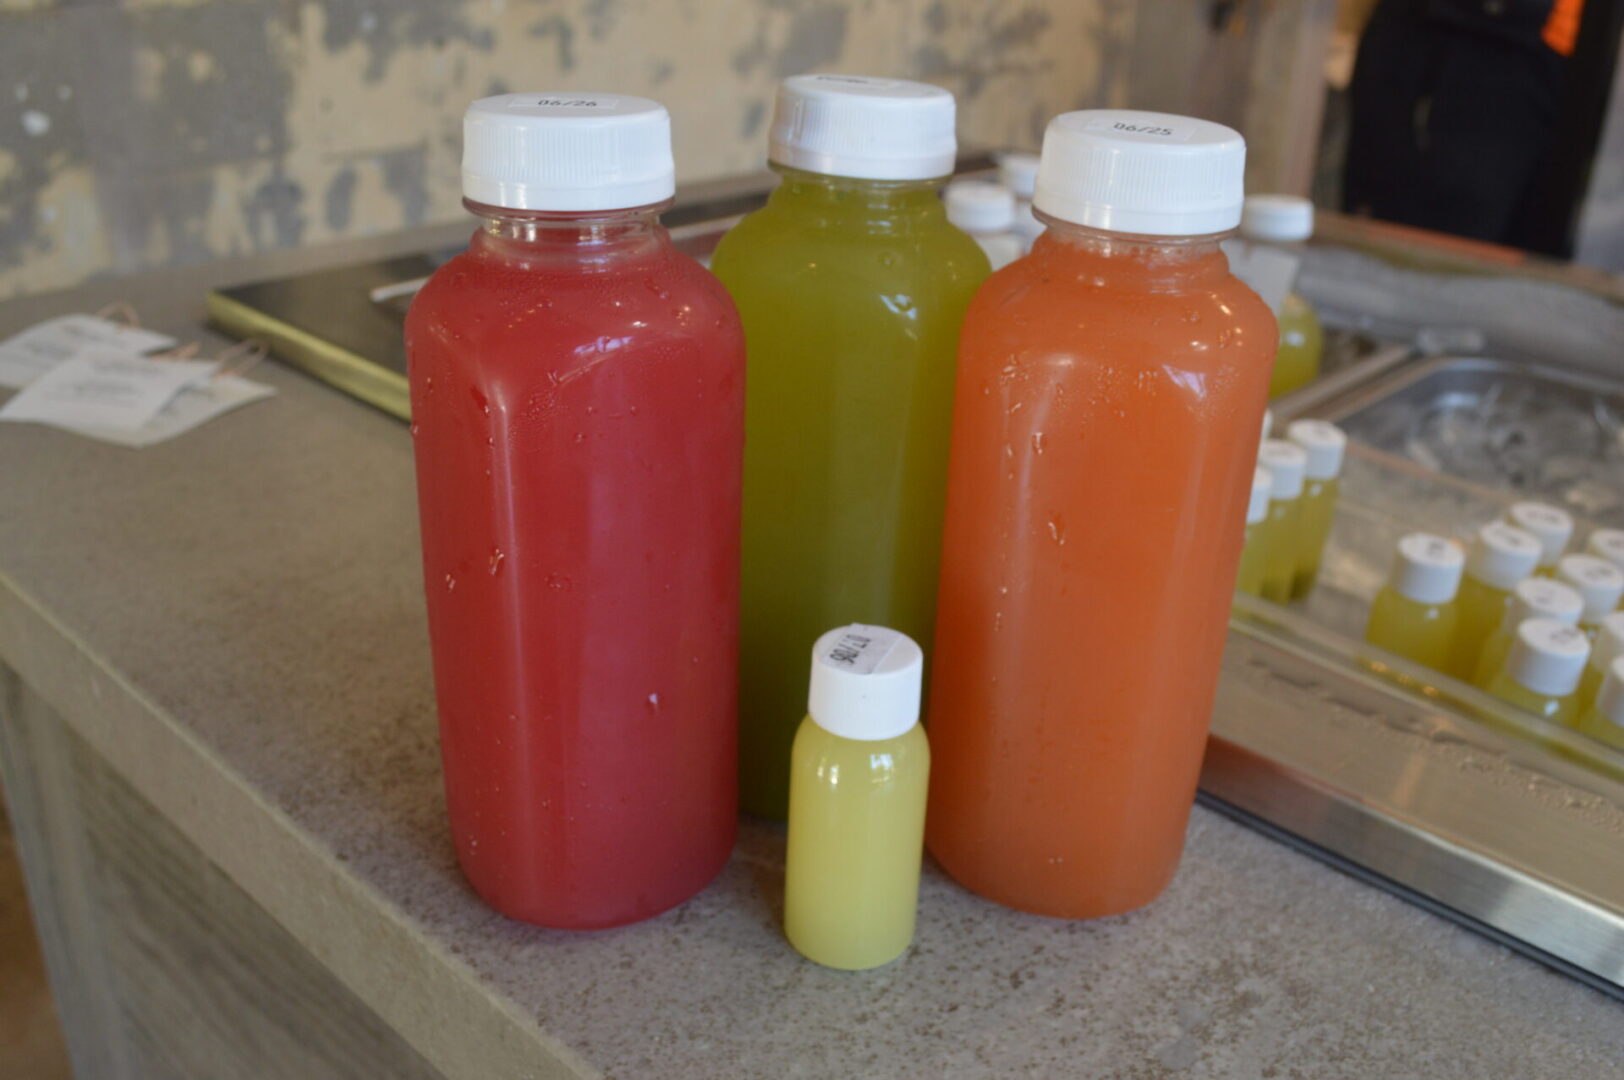 Four bottles of juice are sitting on a counter.